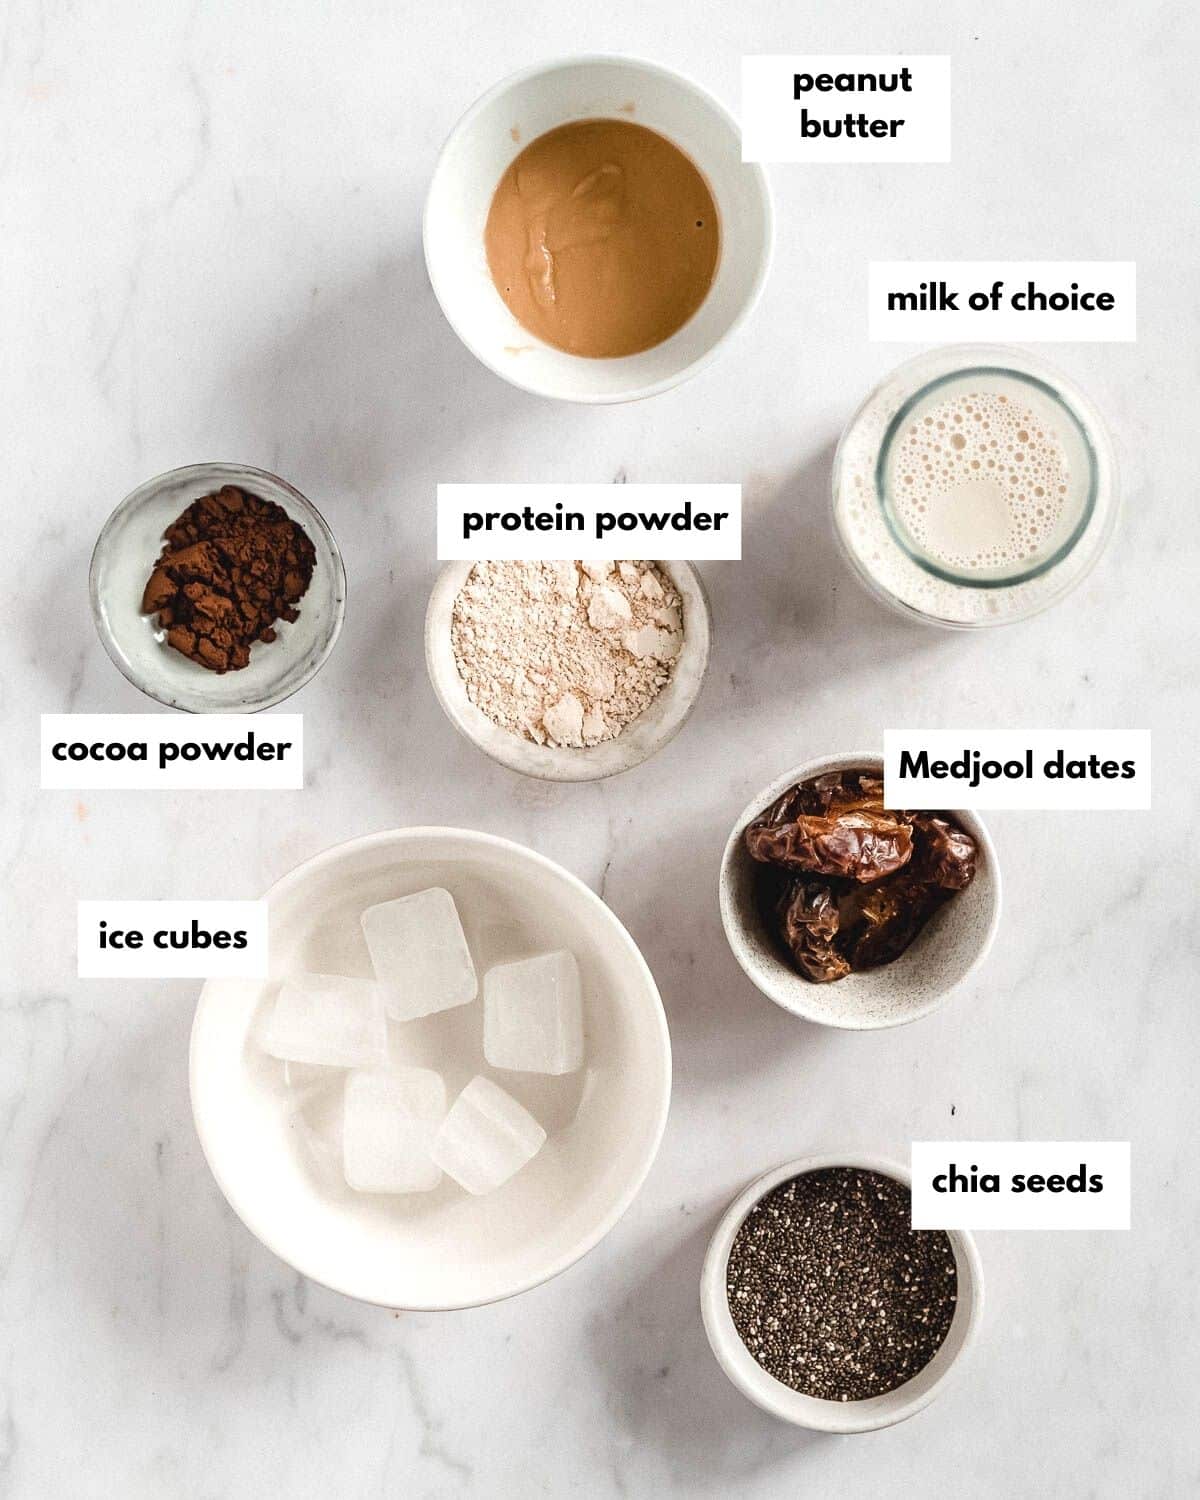 ingredients needed to make chocolate peanut butter protein shake without banana. Peanut butter, milk of choice, protein powder, cocoa powder, Medjool dates, ice cubes, chia seeds.